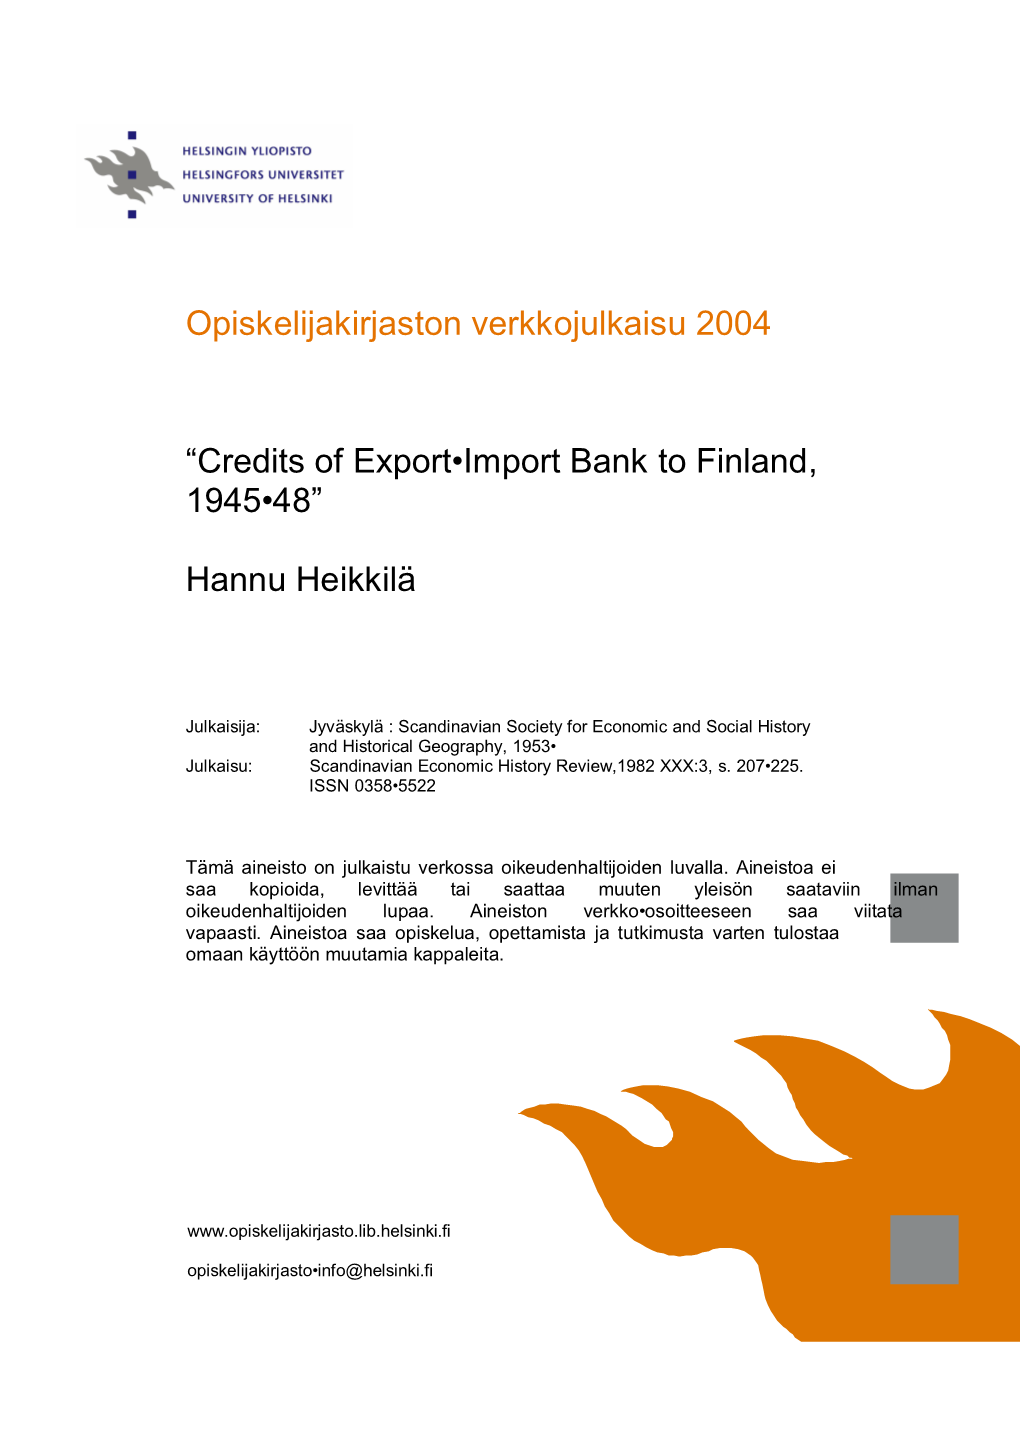 Credits of Export-Import Bank to Finland, 1945-48